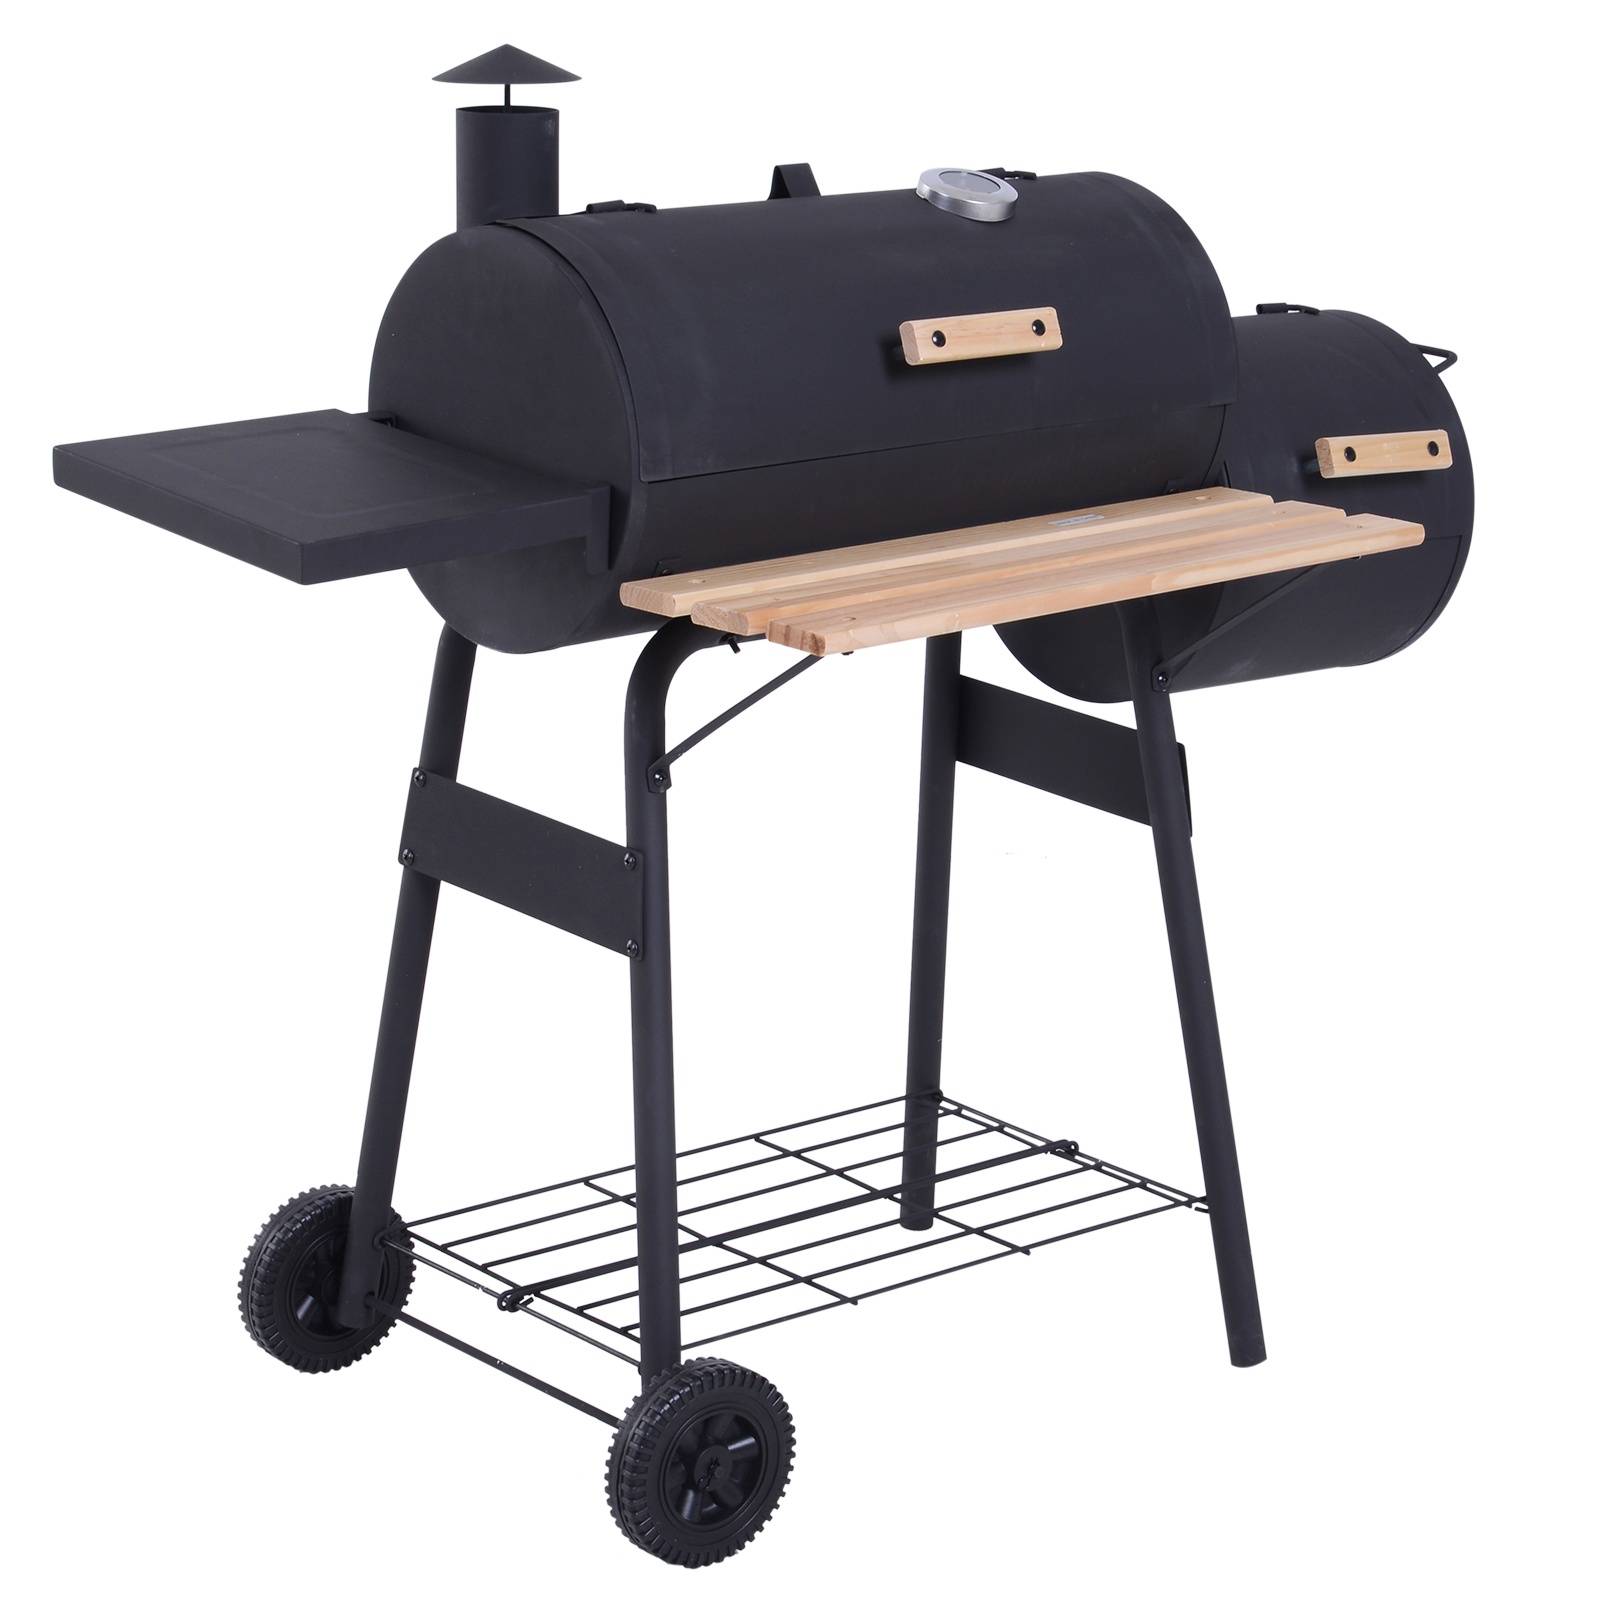 Outsunny 48" Steel Portable Backyard Charcoal BBQ Grill and Offset Smoker Combo - image 1 of 9